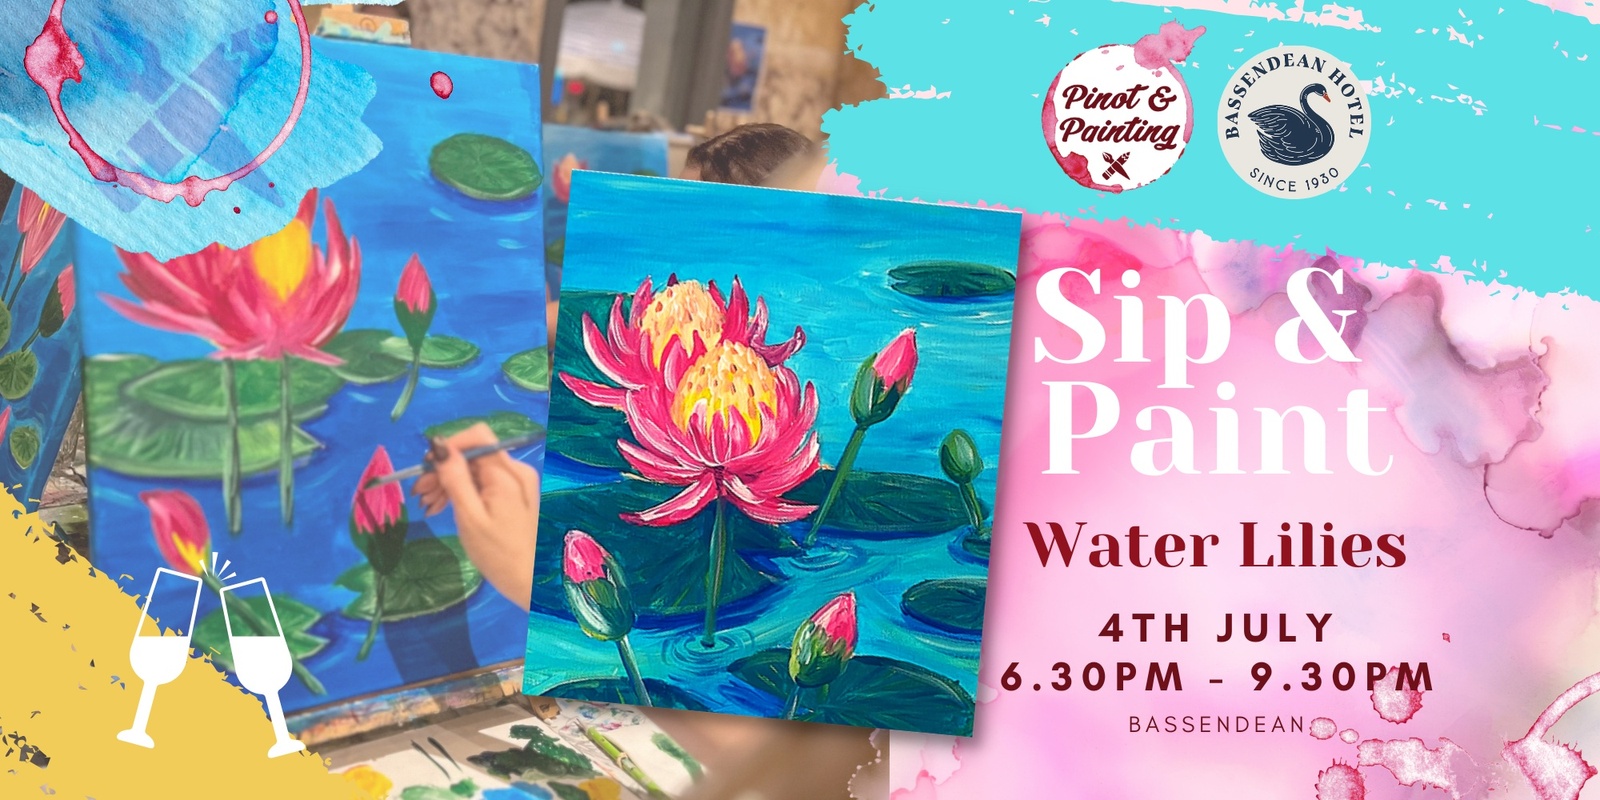 Banner image for Water Lilies - Sip & Paint @ The Bassendean Hotel